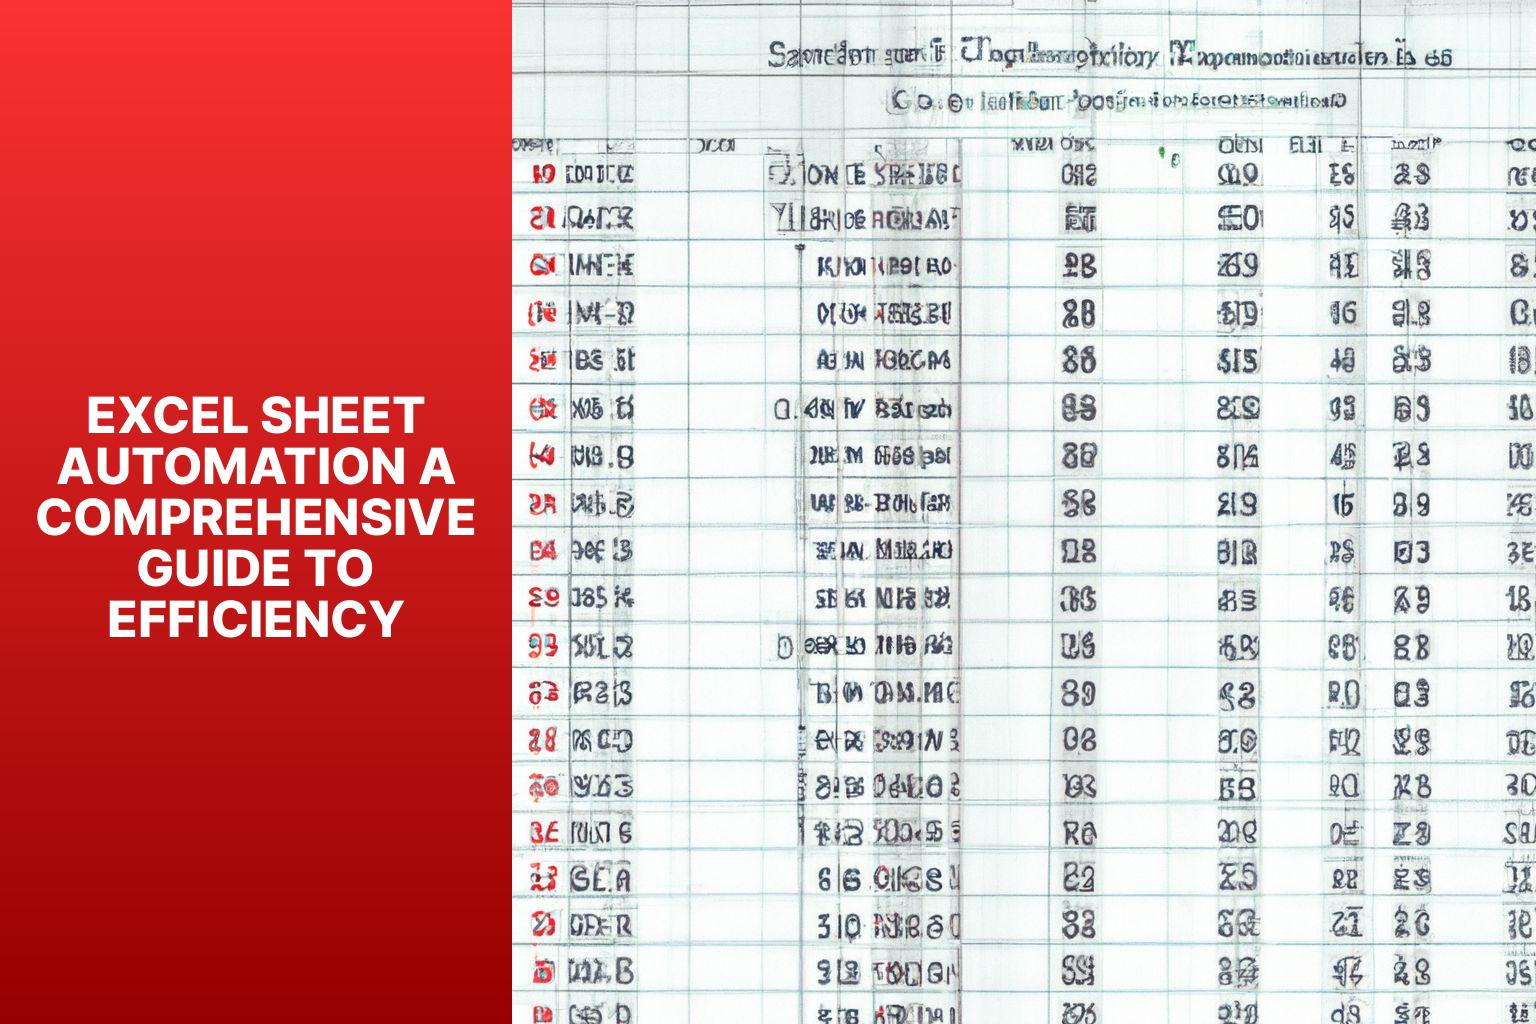 Excel Sheet Automation A Comprehensive Guide to Efficiency